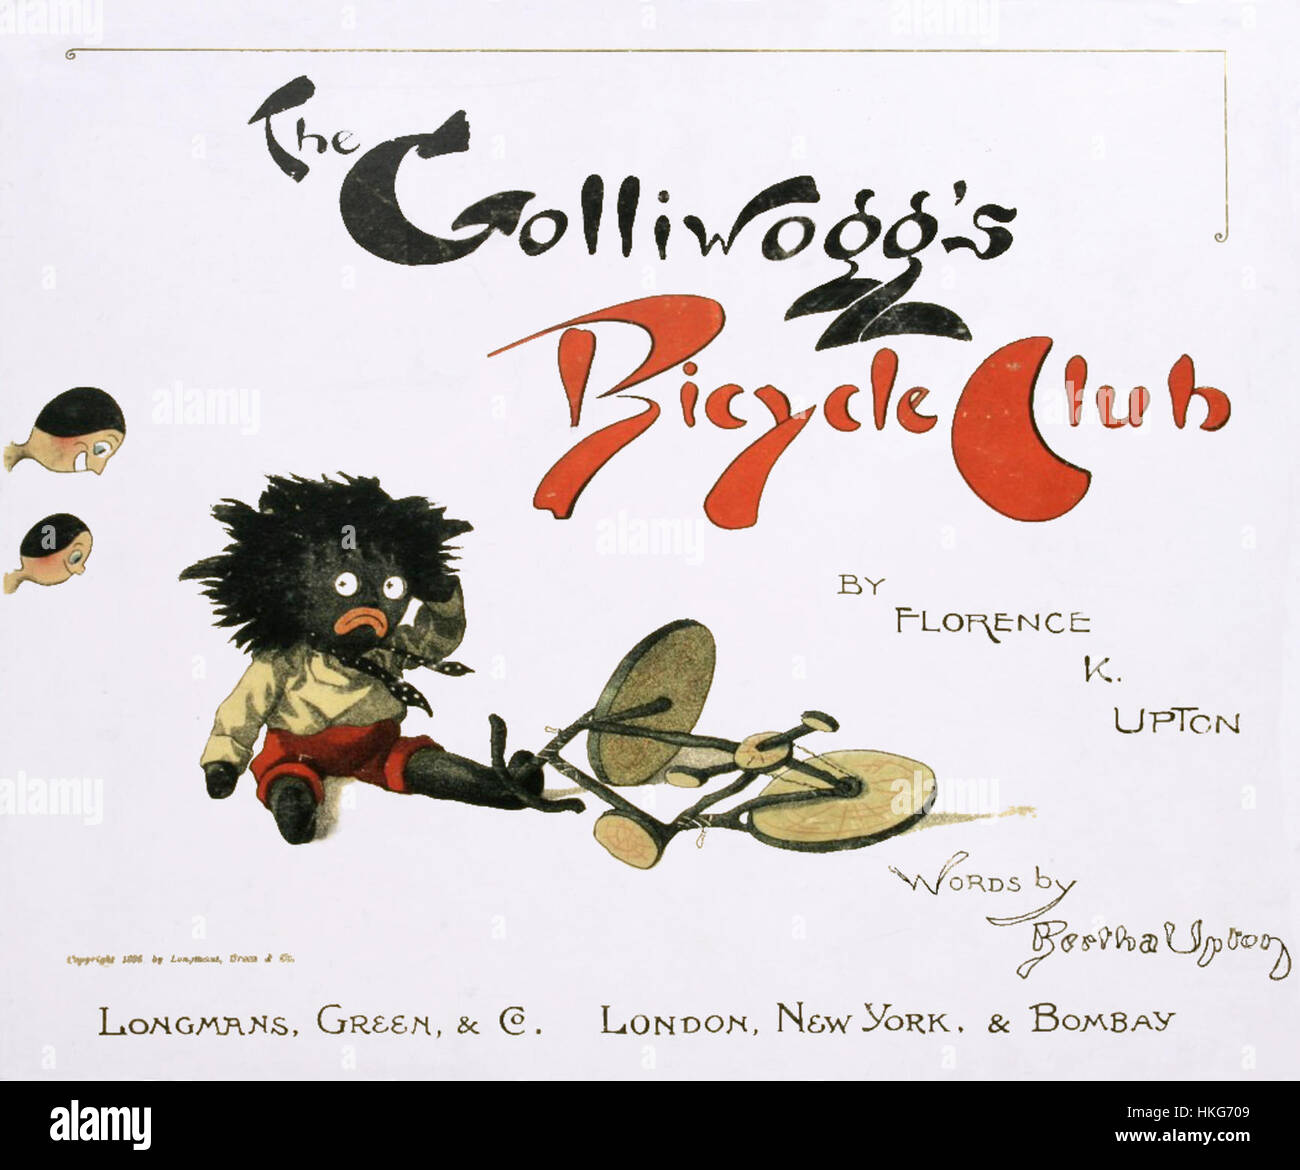 The Golliwogg's Bicycle Club cover Stock Photo